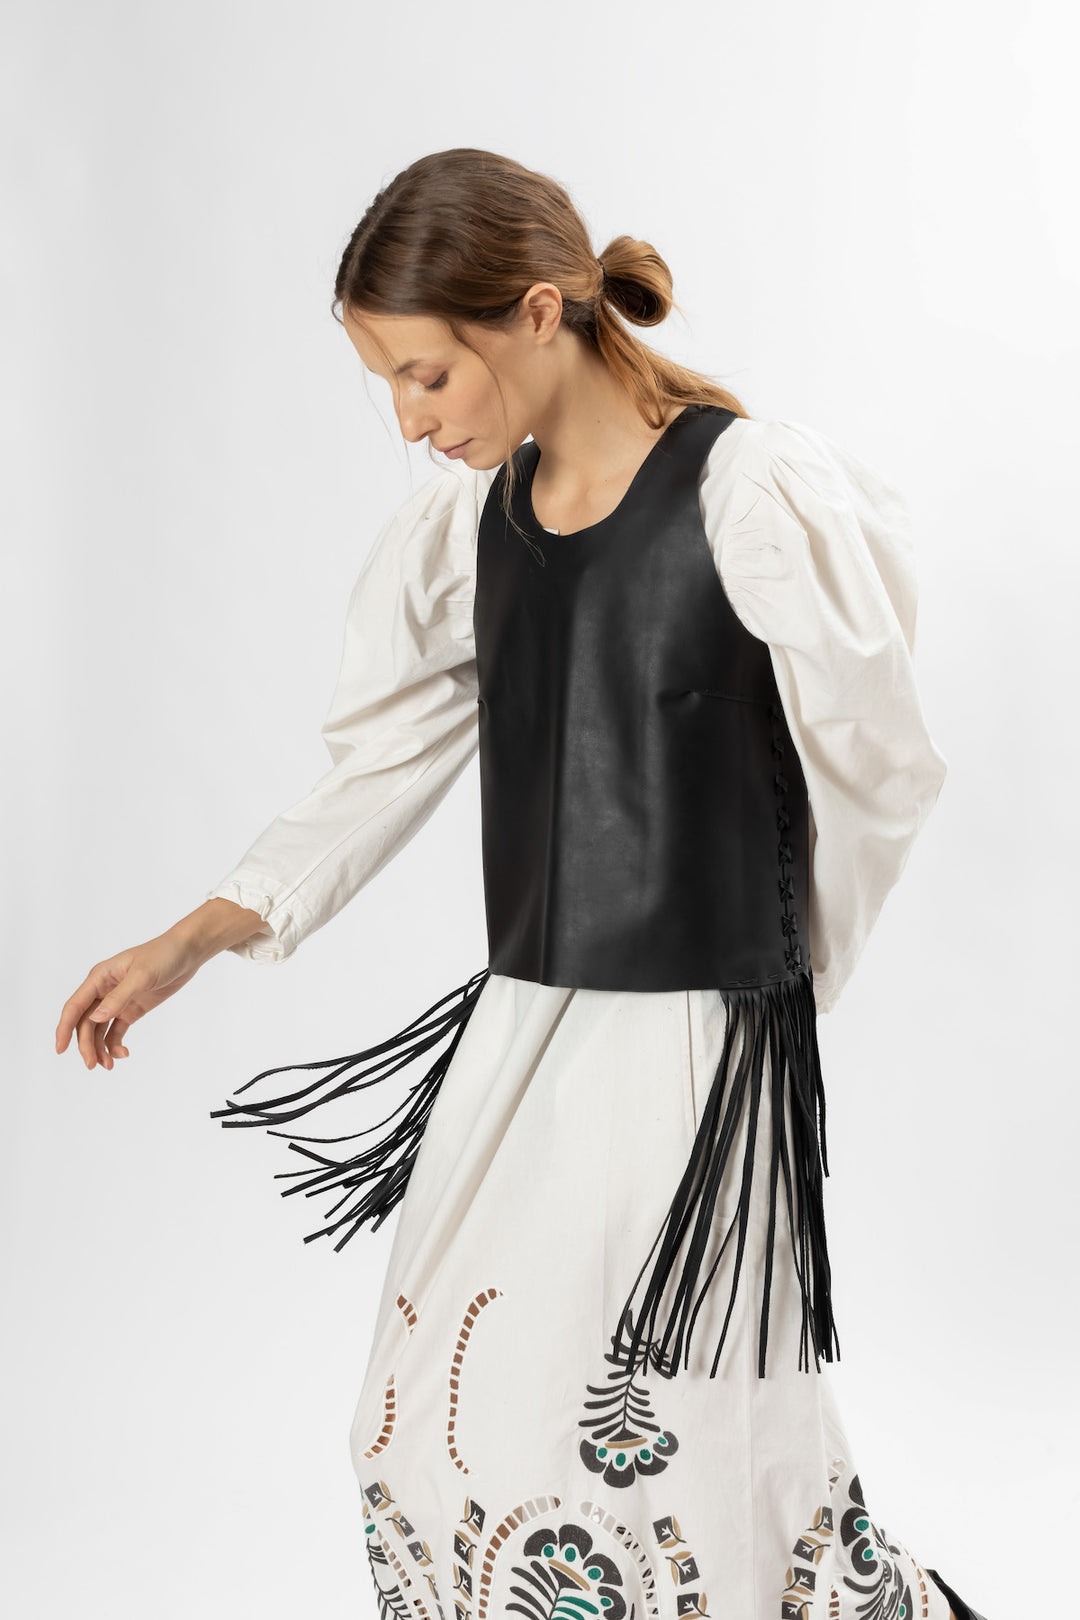 Hand Matters. Styling leather top with fringes